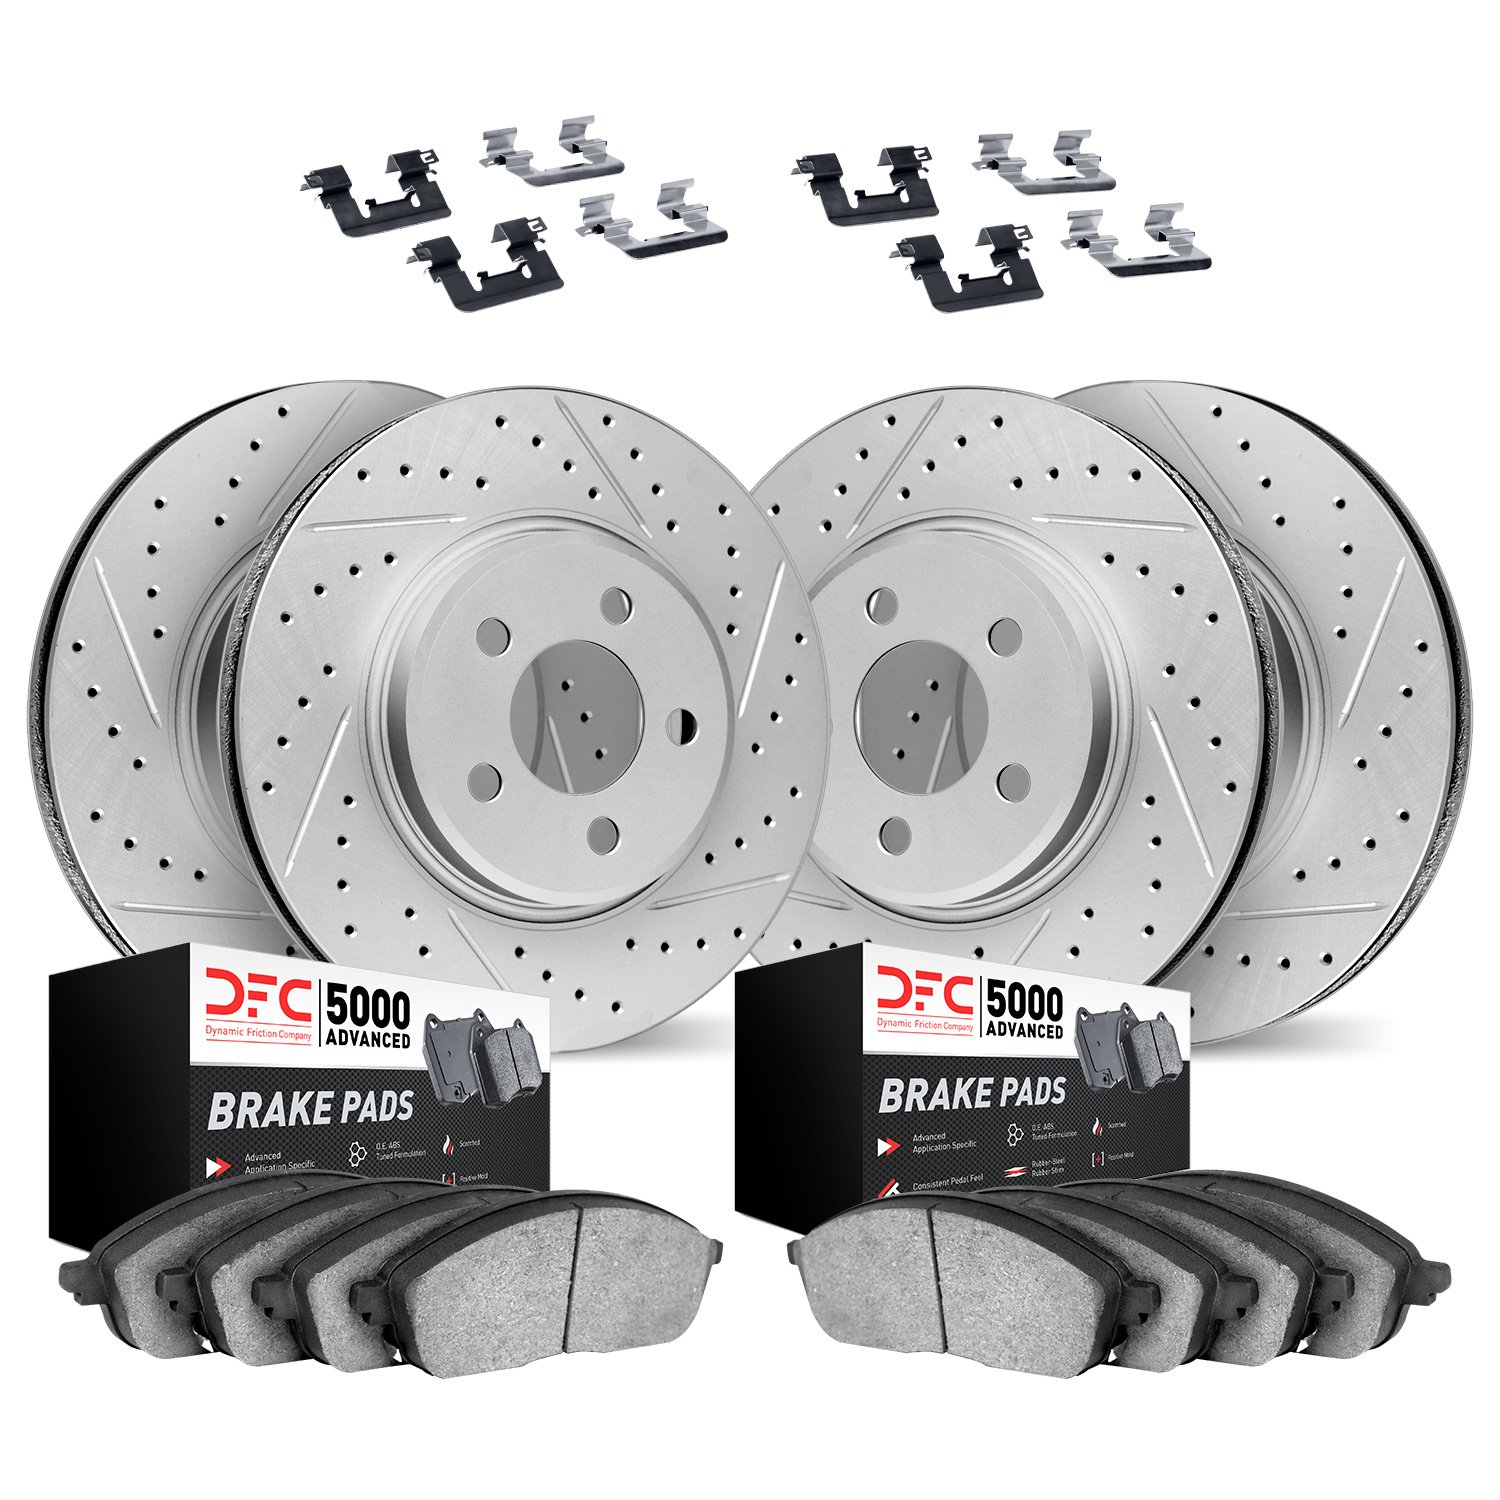 2514-31019 Geoperformance Drilled/Slotted Rotors w/5000 Advanced Brake Pads Kit & Hardware, 2010-2015 BMW, Position: Front and R